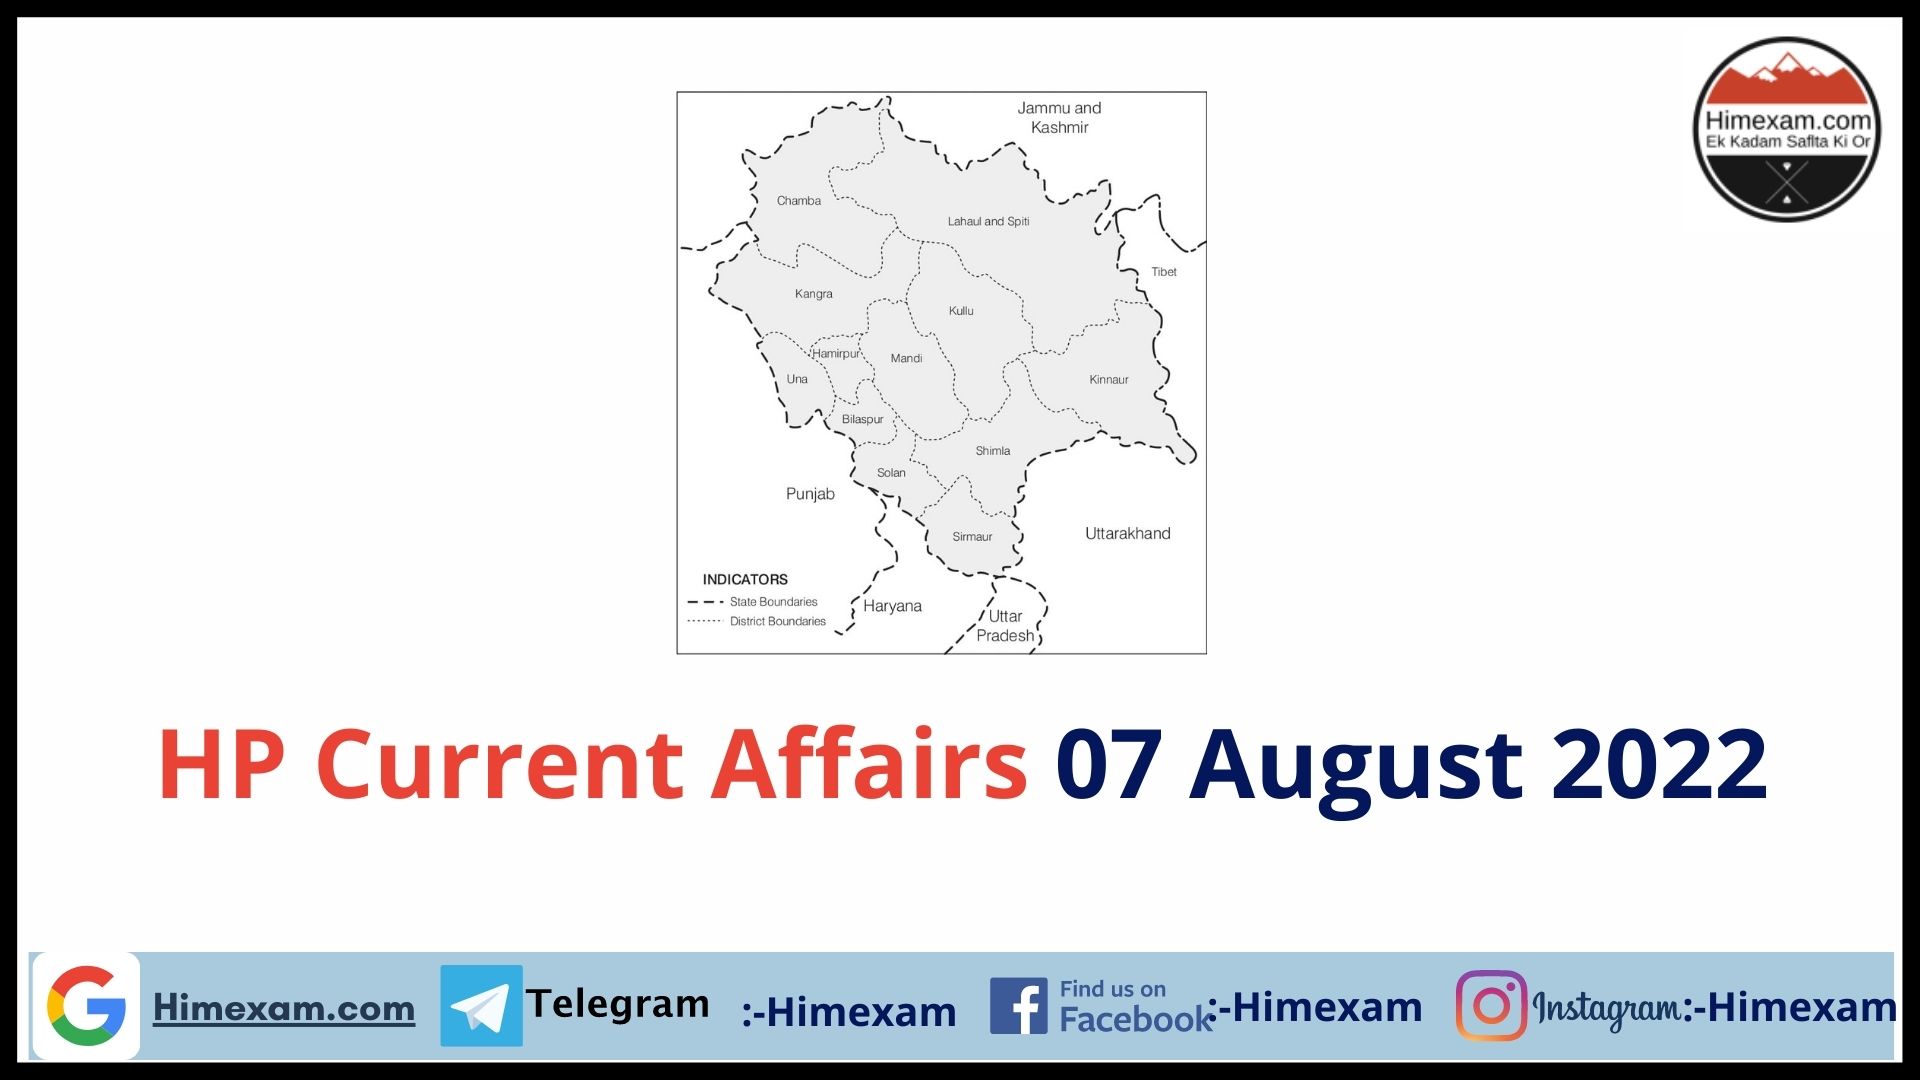 HP Current Affairs 07 August 2022